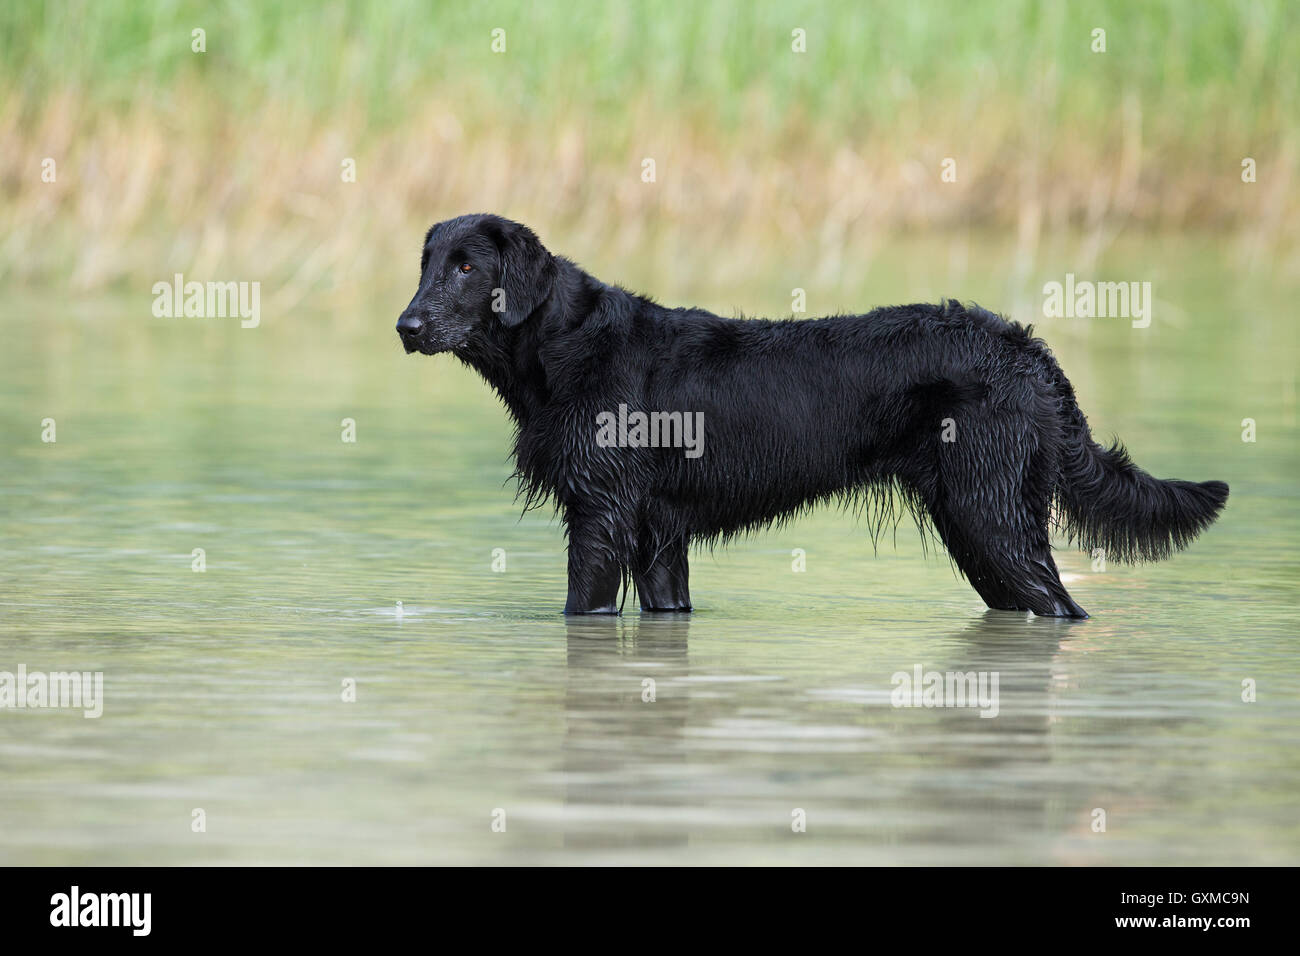 Flat-Coated Retriever, black, standing in water in front of reeds, Tyrol, Austria Stock Photo